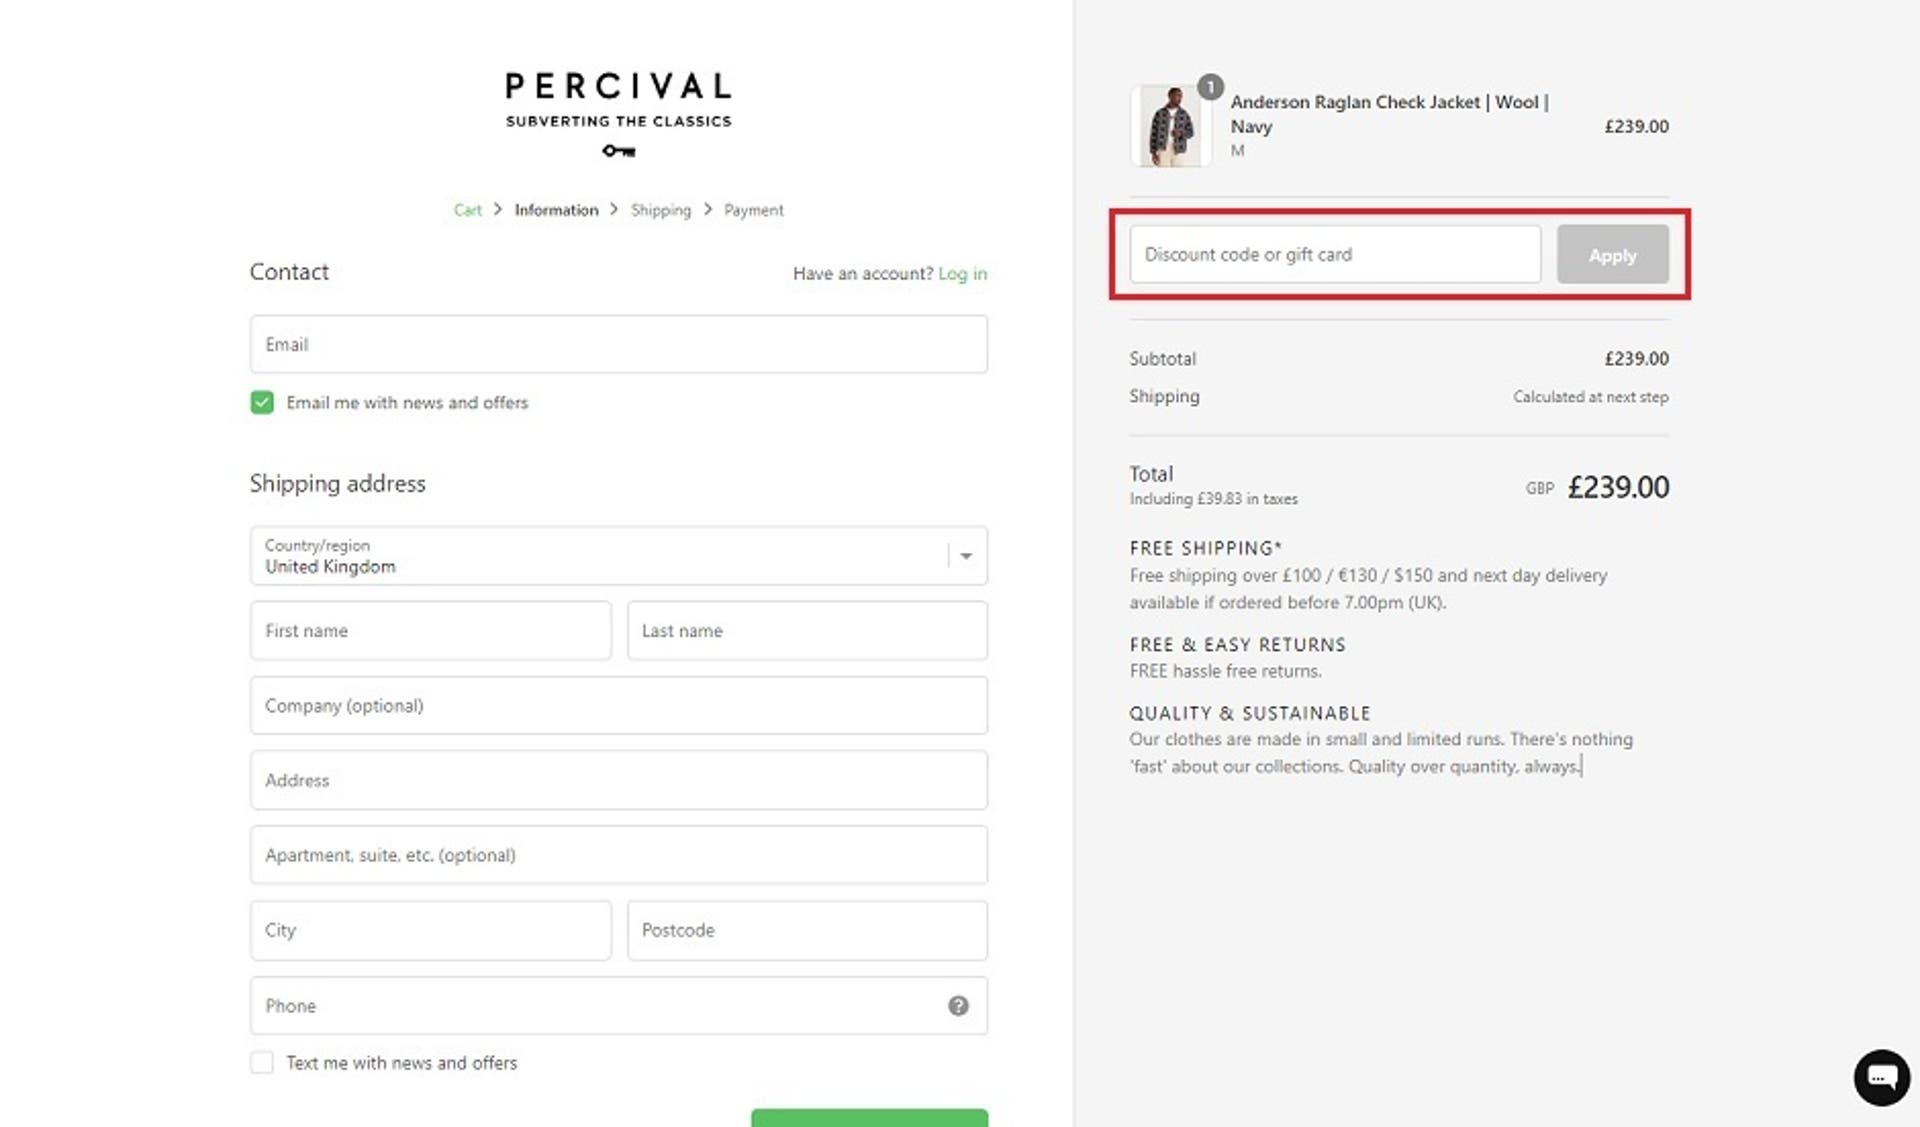  A screenshot of the Percival website showing users how to enter their discount code with the 'Discount code or gift card' box and 'Apply' button highlighted. 